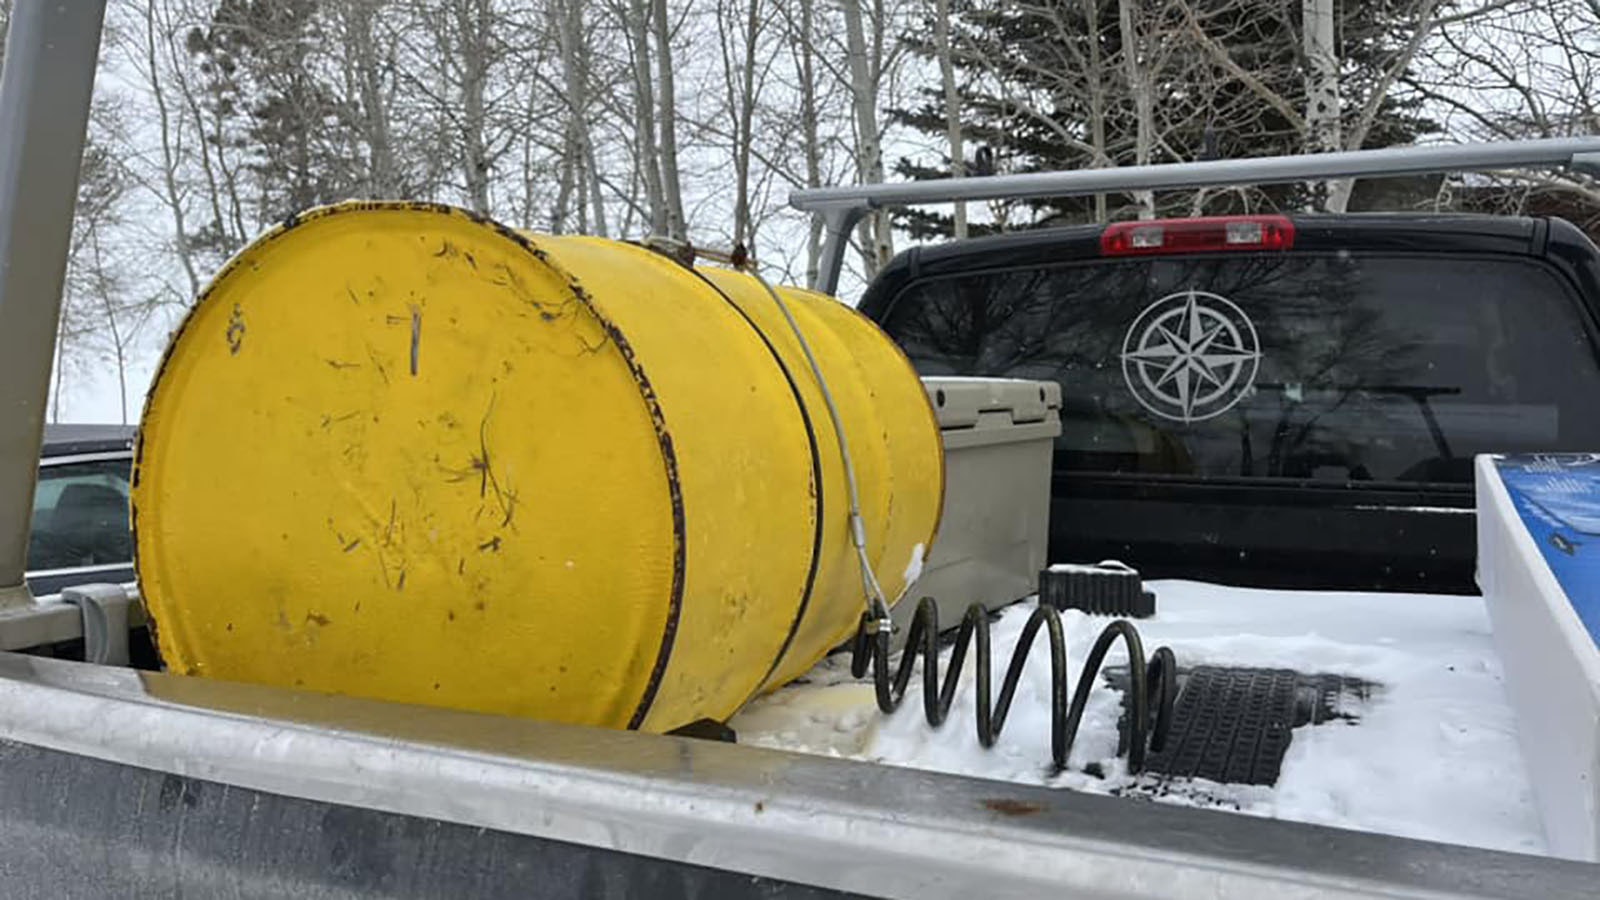 Bob the barrel is locked up tight before it was placed out on Fremont Lake last month.